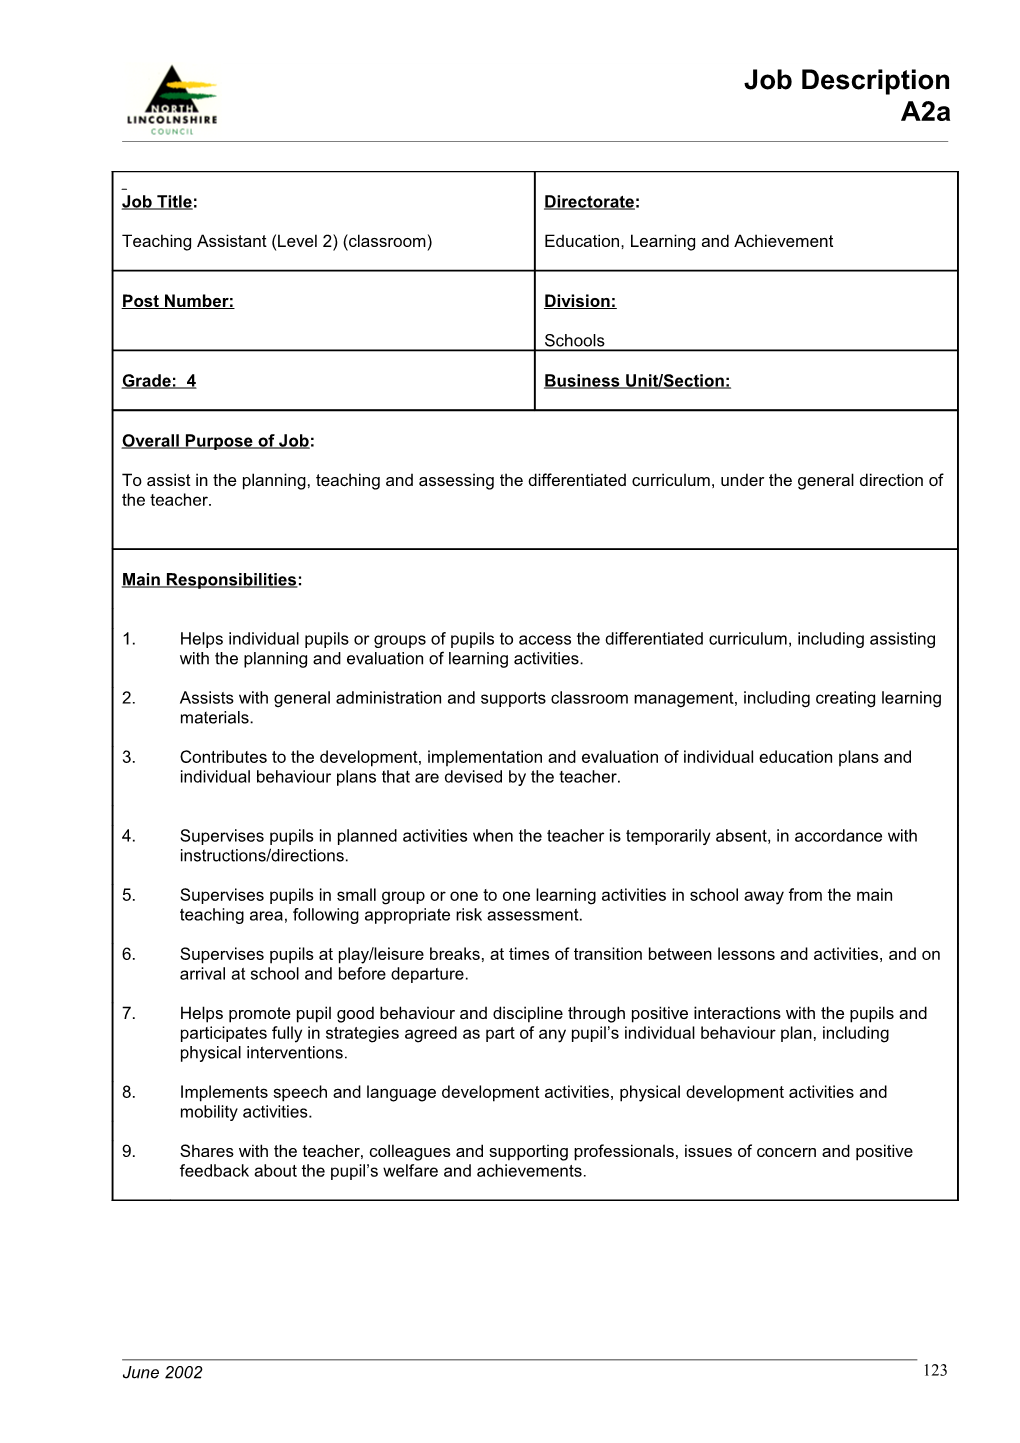 Teaching Assistant (Level 2) (Classroom)